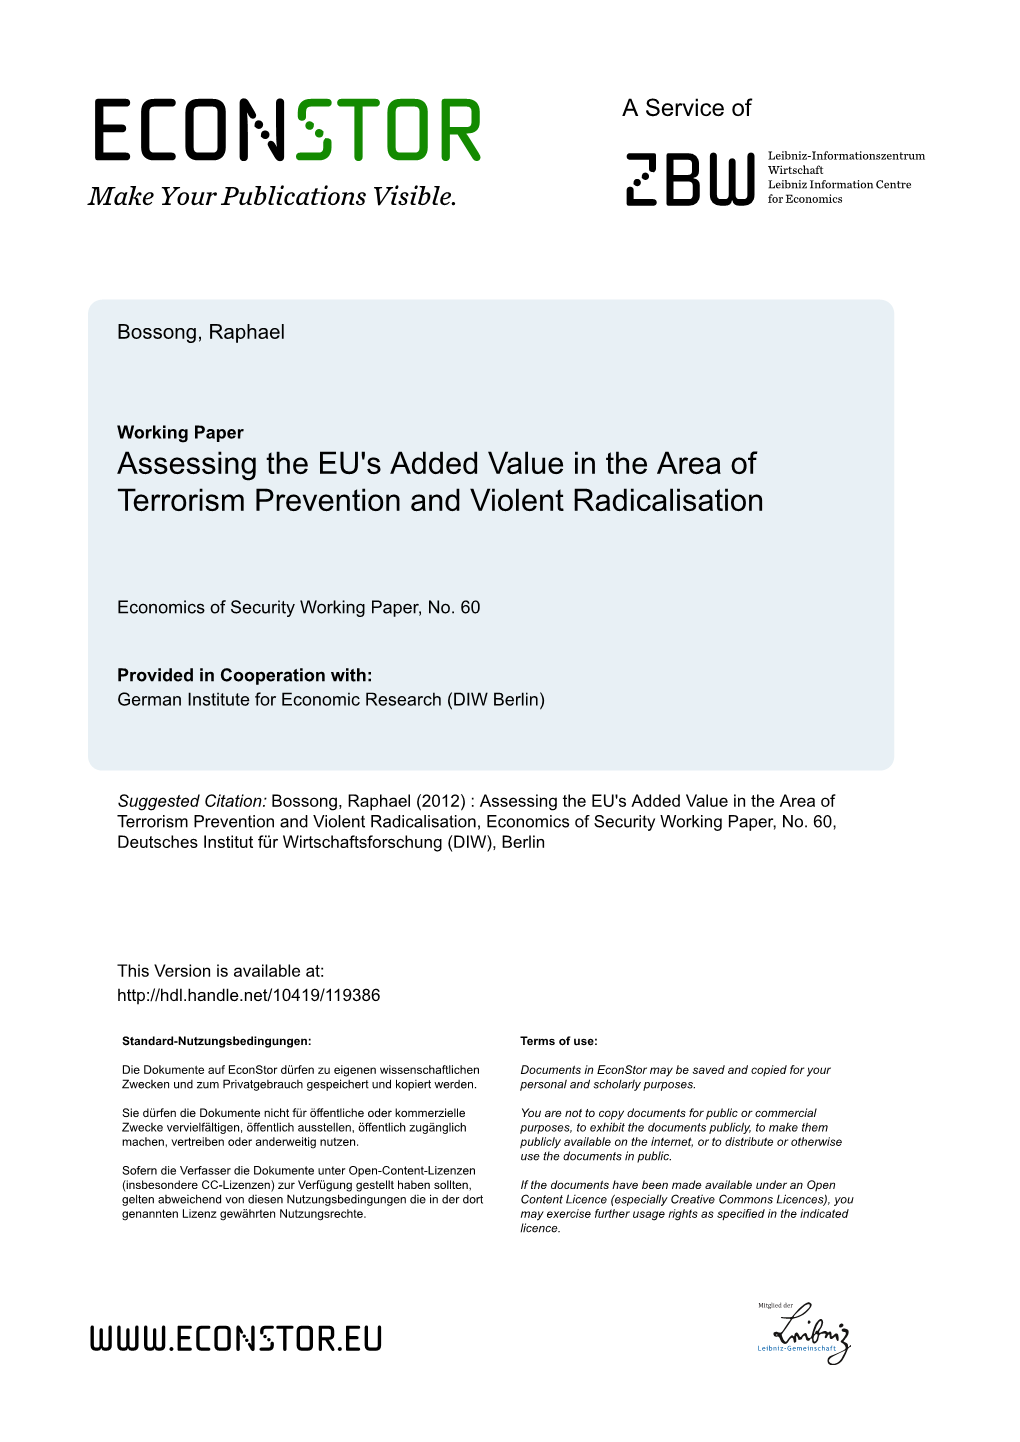 Assessing the EU's Added Value in the Area of Terrorism Prevention and Violent Radicalisation